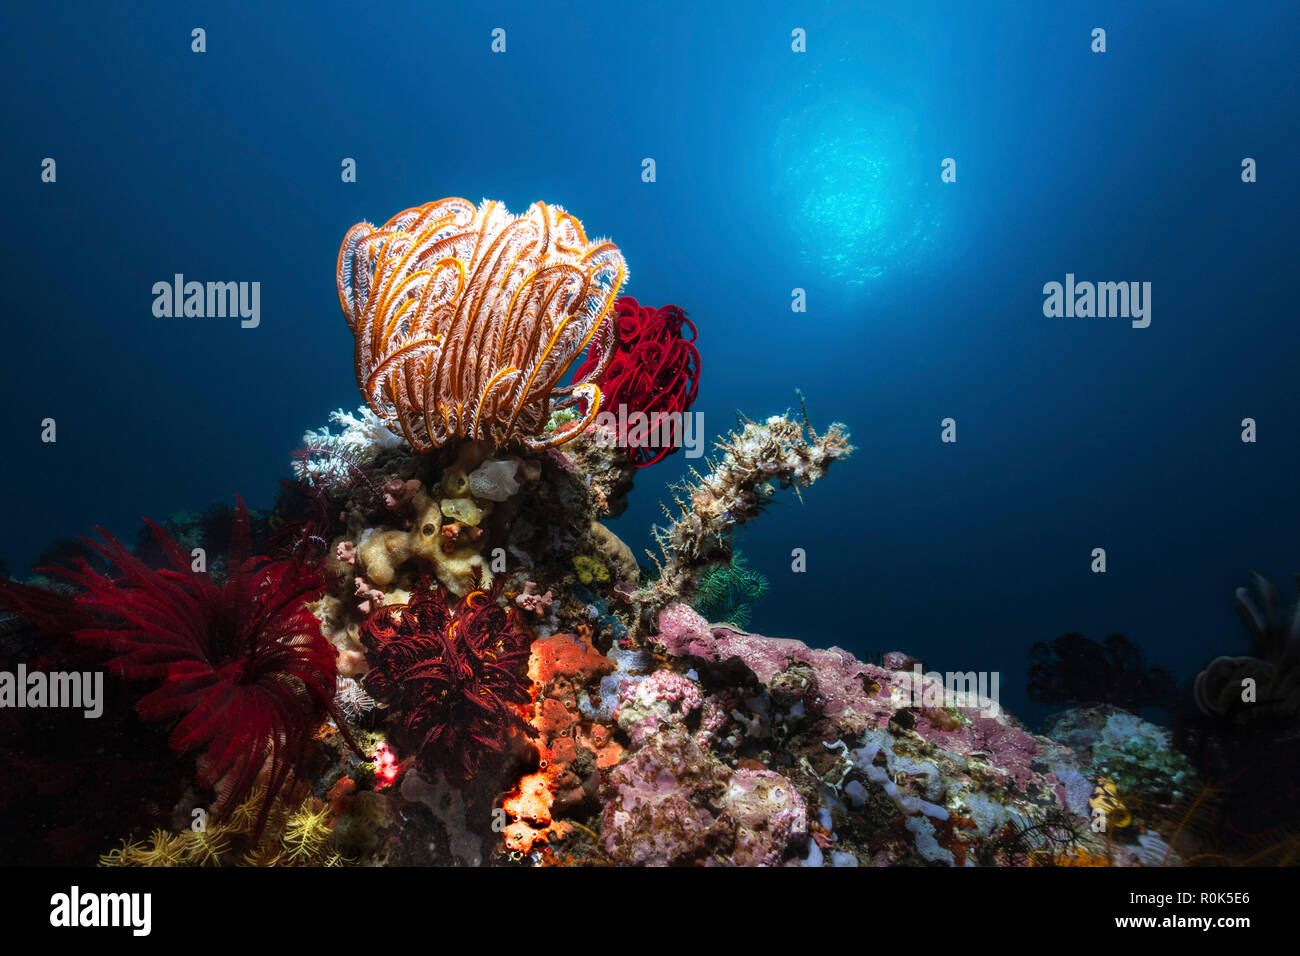 Collection of crinoids, sponges and corals in the Philippines. Stock Photo